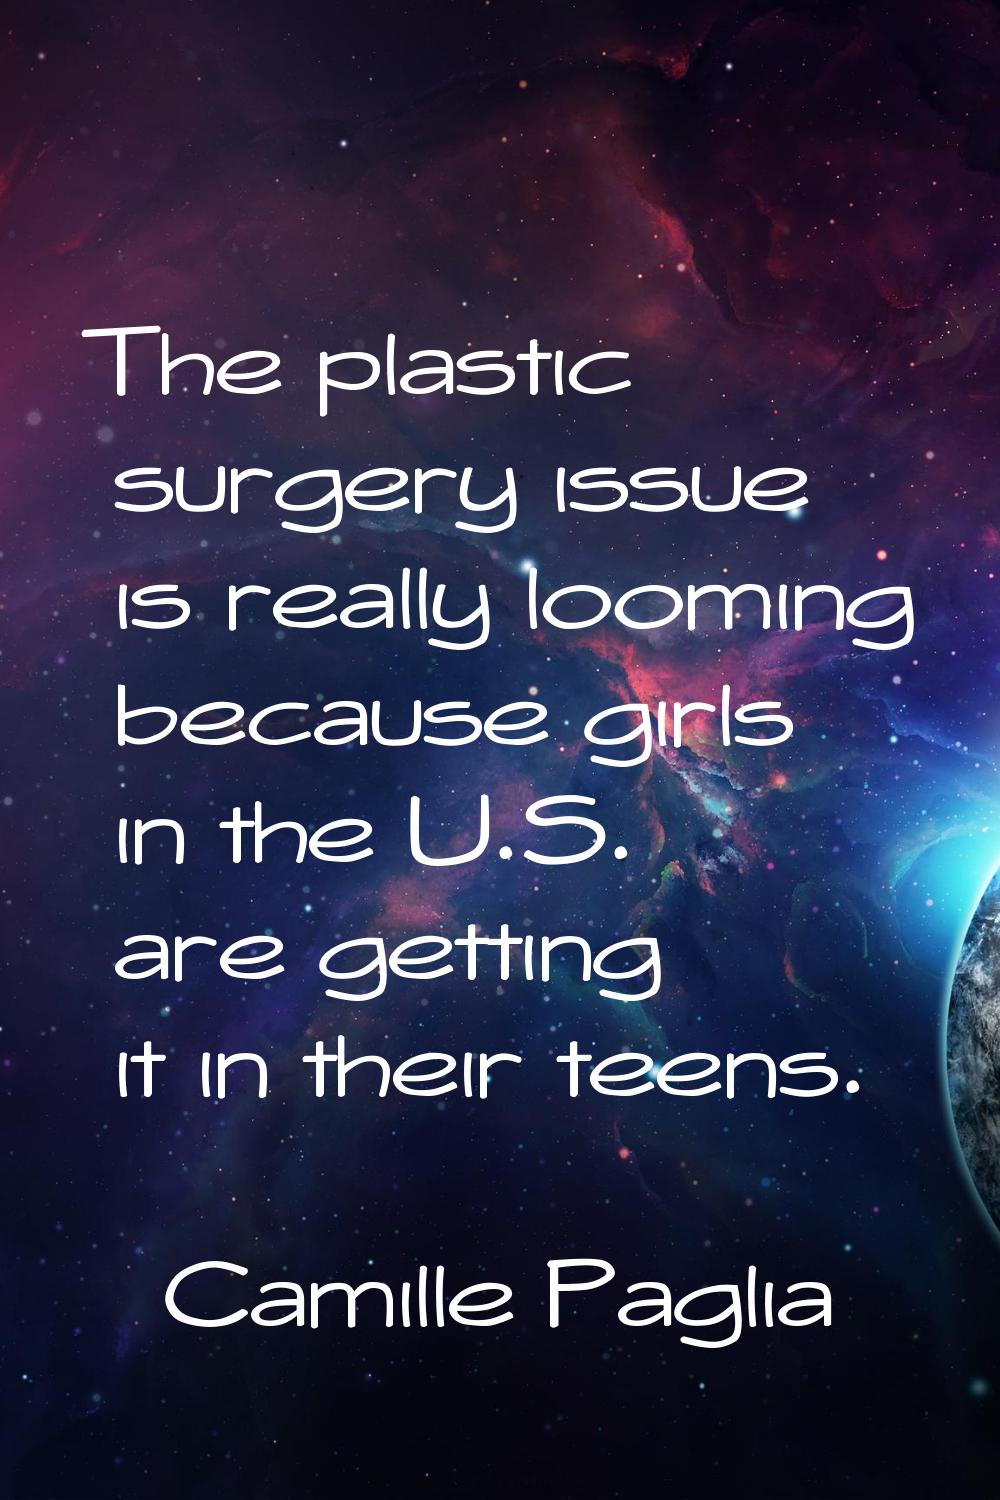 The plastic surgery issue is really looming because girls in the U.S. are getting it in their teens